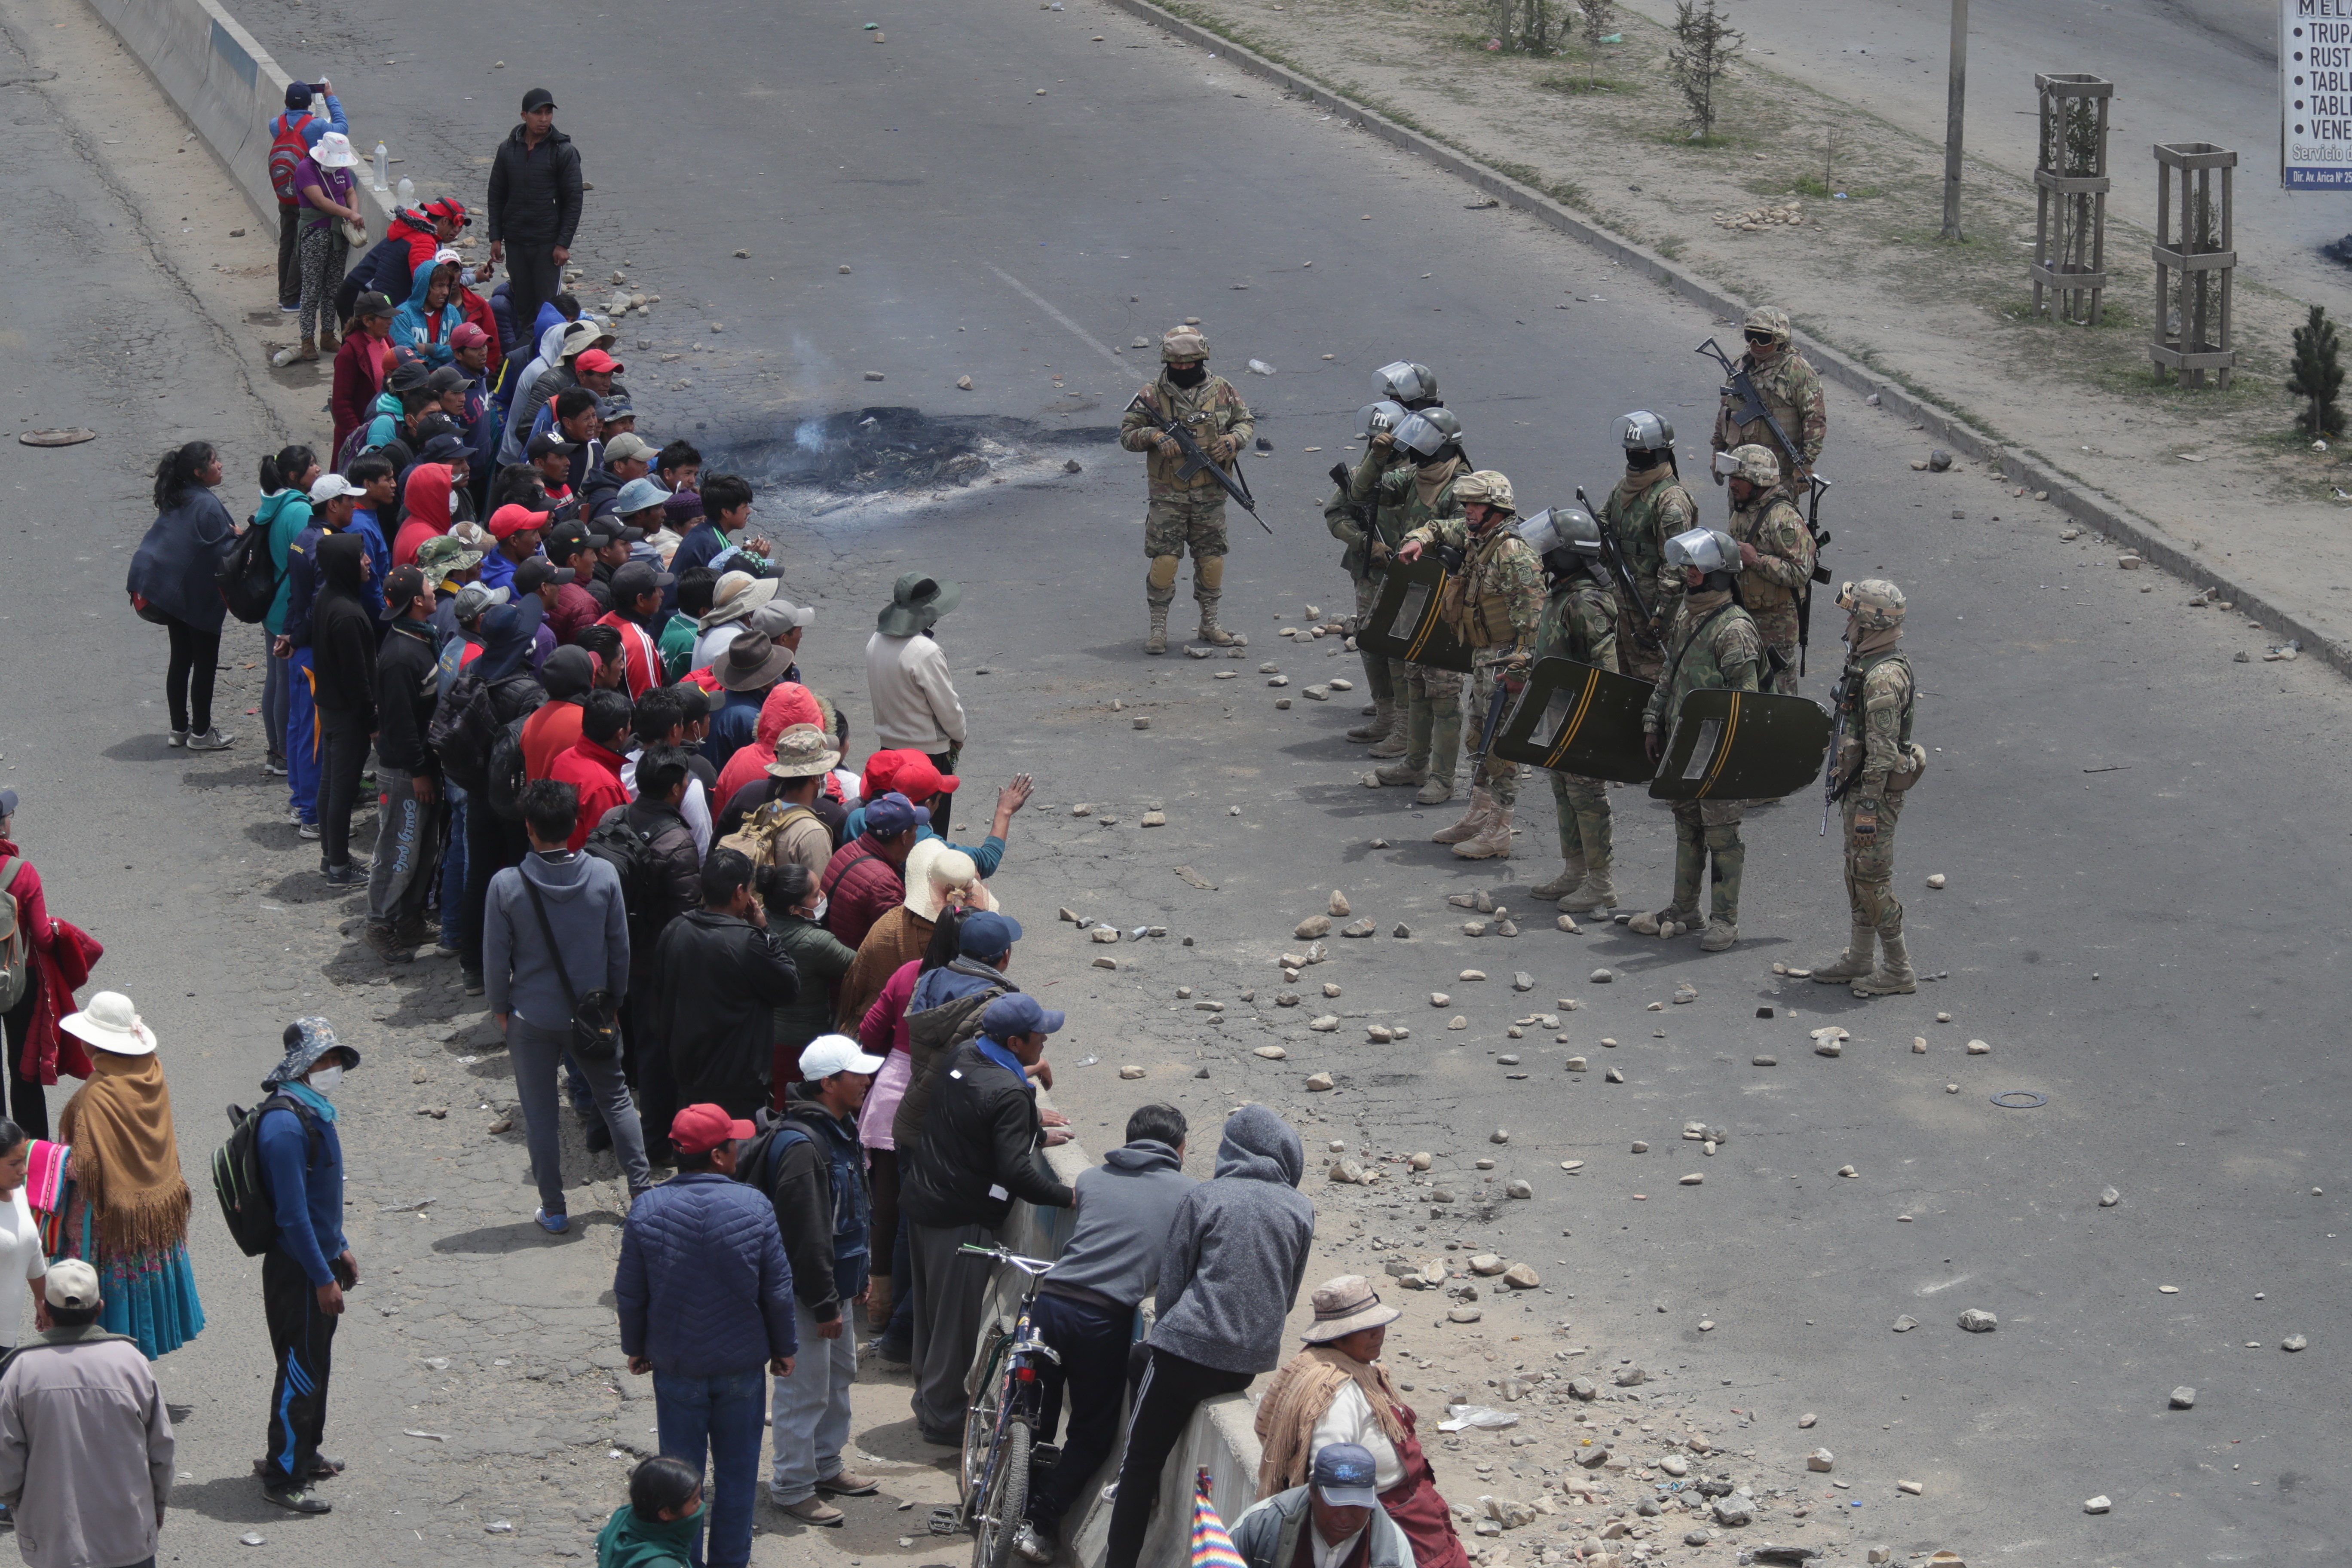 epa08009332 People takes part in protests in El Alto, Bolivia 19 November 2019. Police and military dispersed protesters protesting against the interim government of Jeanine Áñez in El Alto at the Senkata region half an hour from La Paz, Bolivia. The banner reads 'Áñez murderer'  EPA/Rodrigo Sura